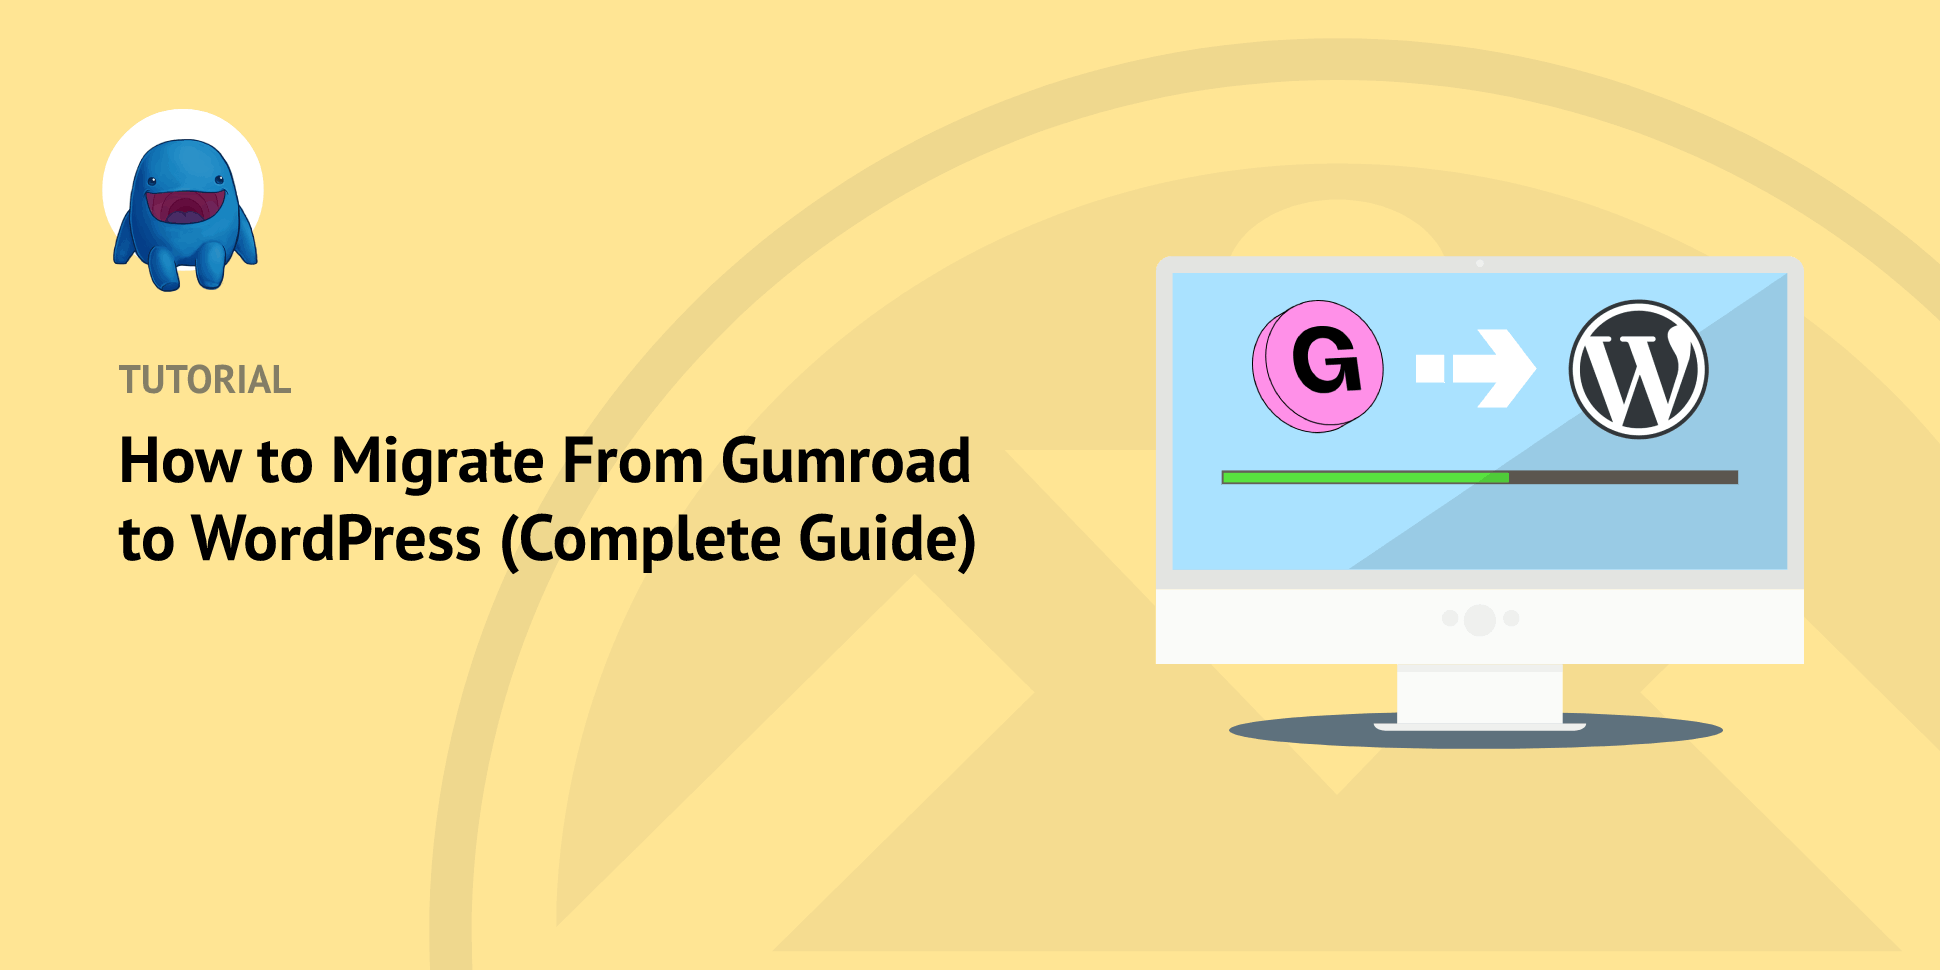 How to Migrate From Gumroad to WordPress (Step By Step)